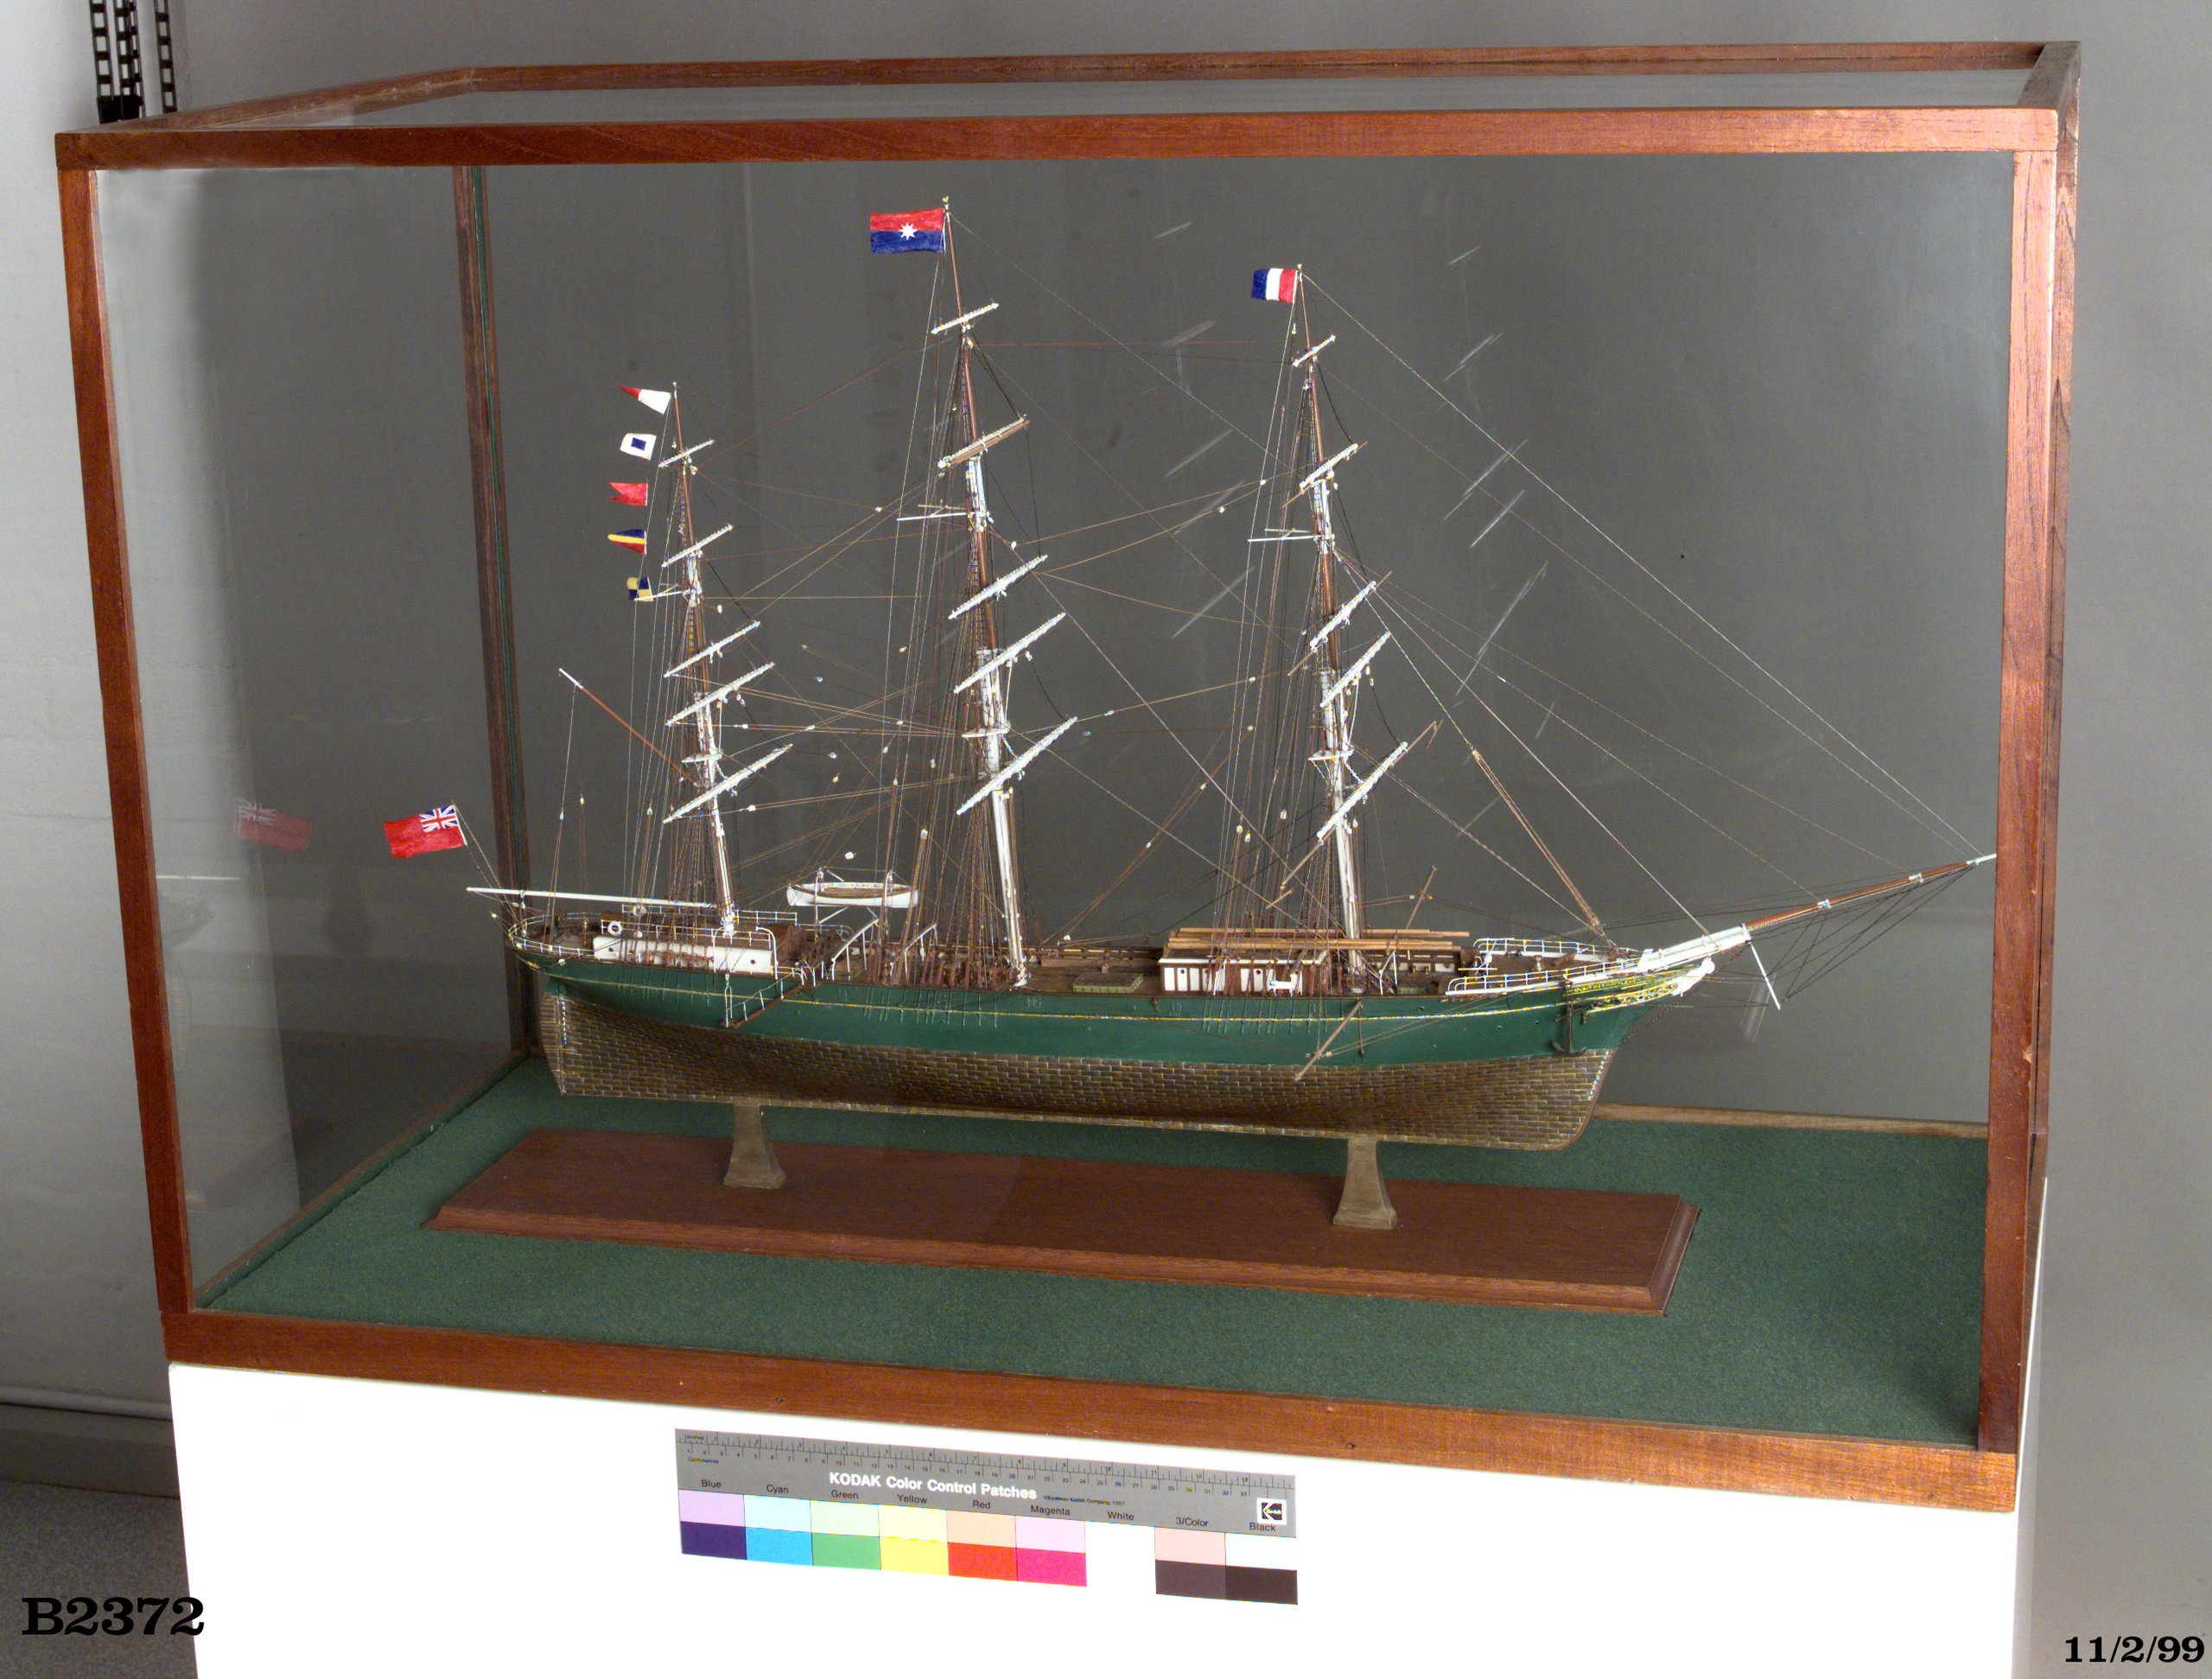 Scale model of the clipper ship "Thermopylae" made by Cyril Hume